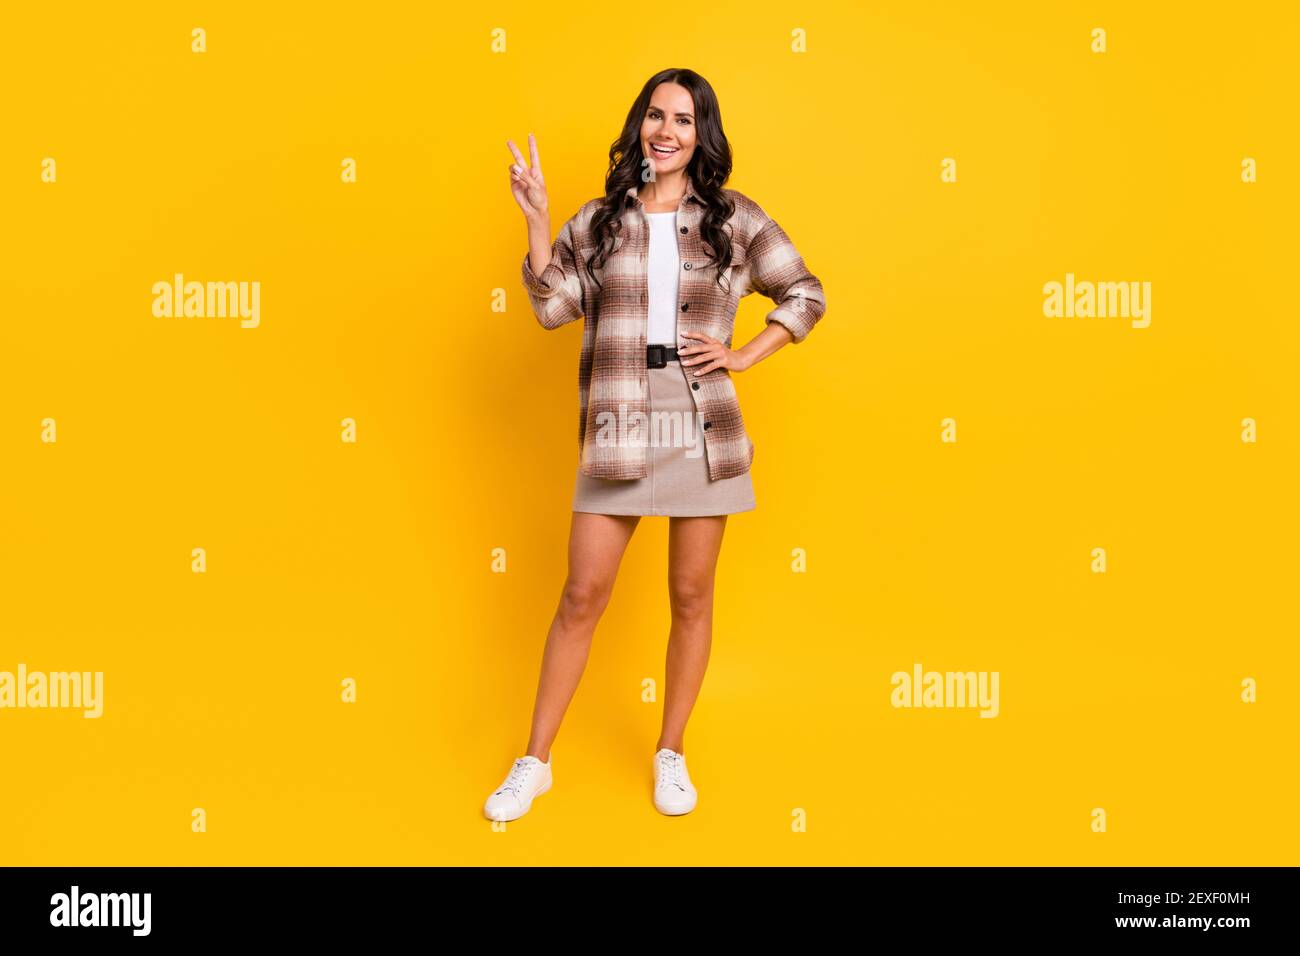 Short Skirt Funny High Resolution Stock Photography and Images - Alamy